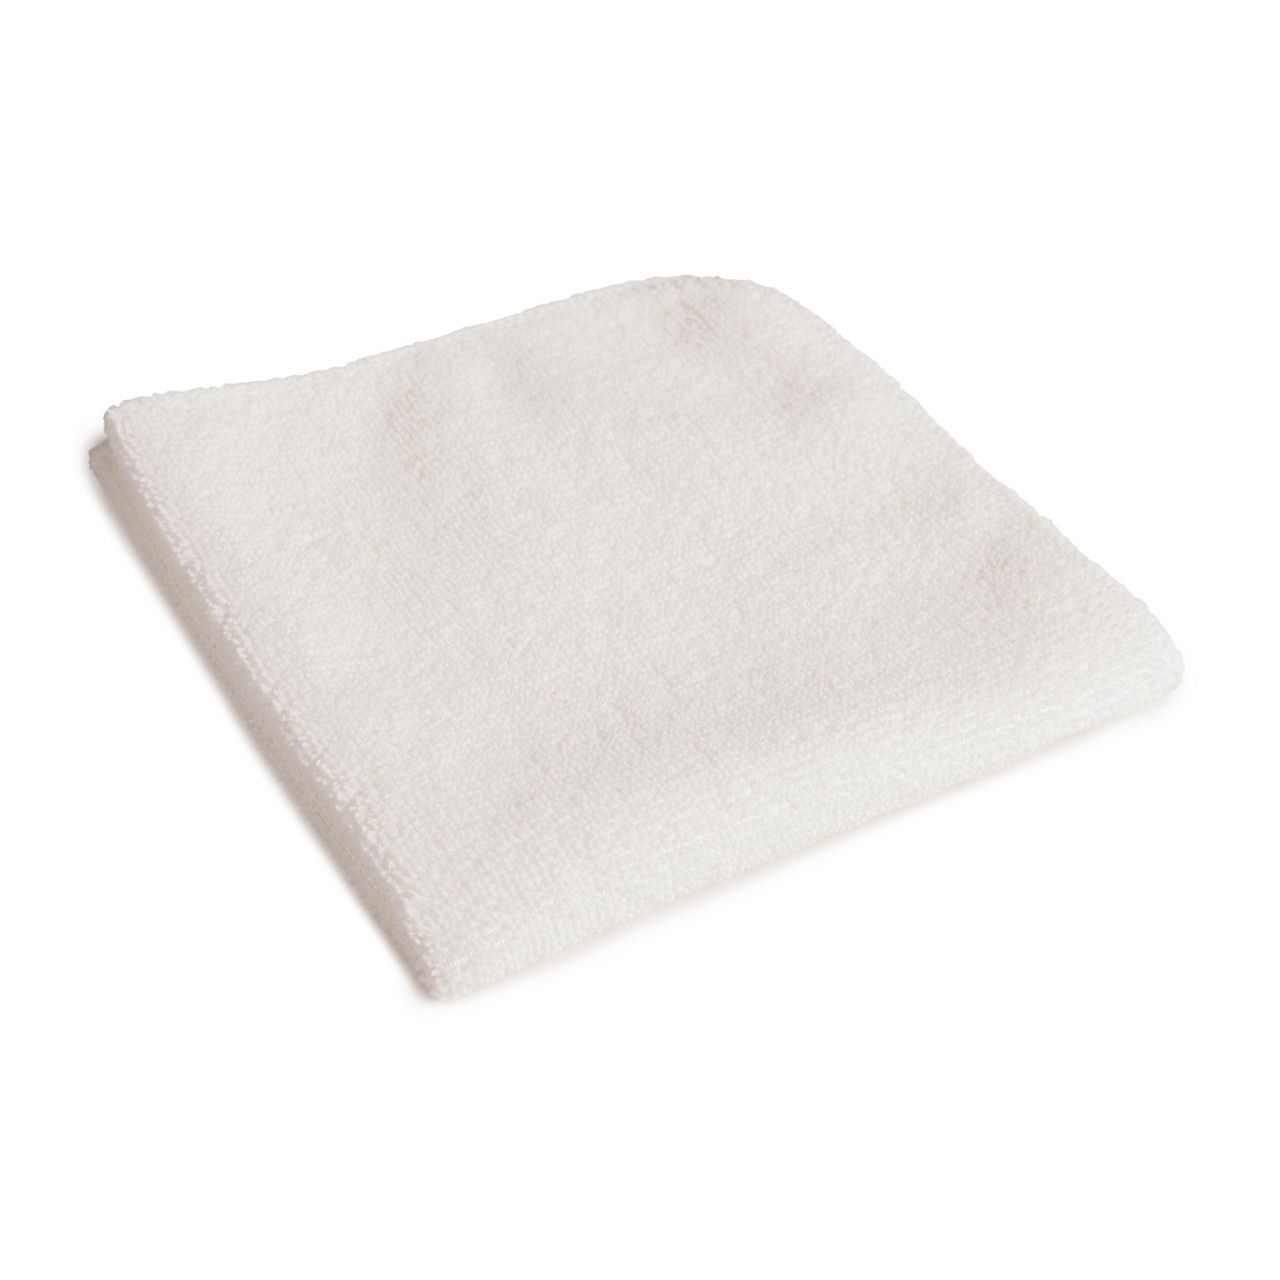 Can you specify the material choices for the Dairy Towel Washcloth, specifically the 12x12 dairy towels?